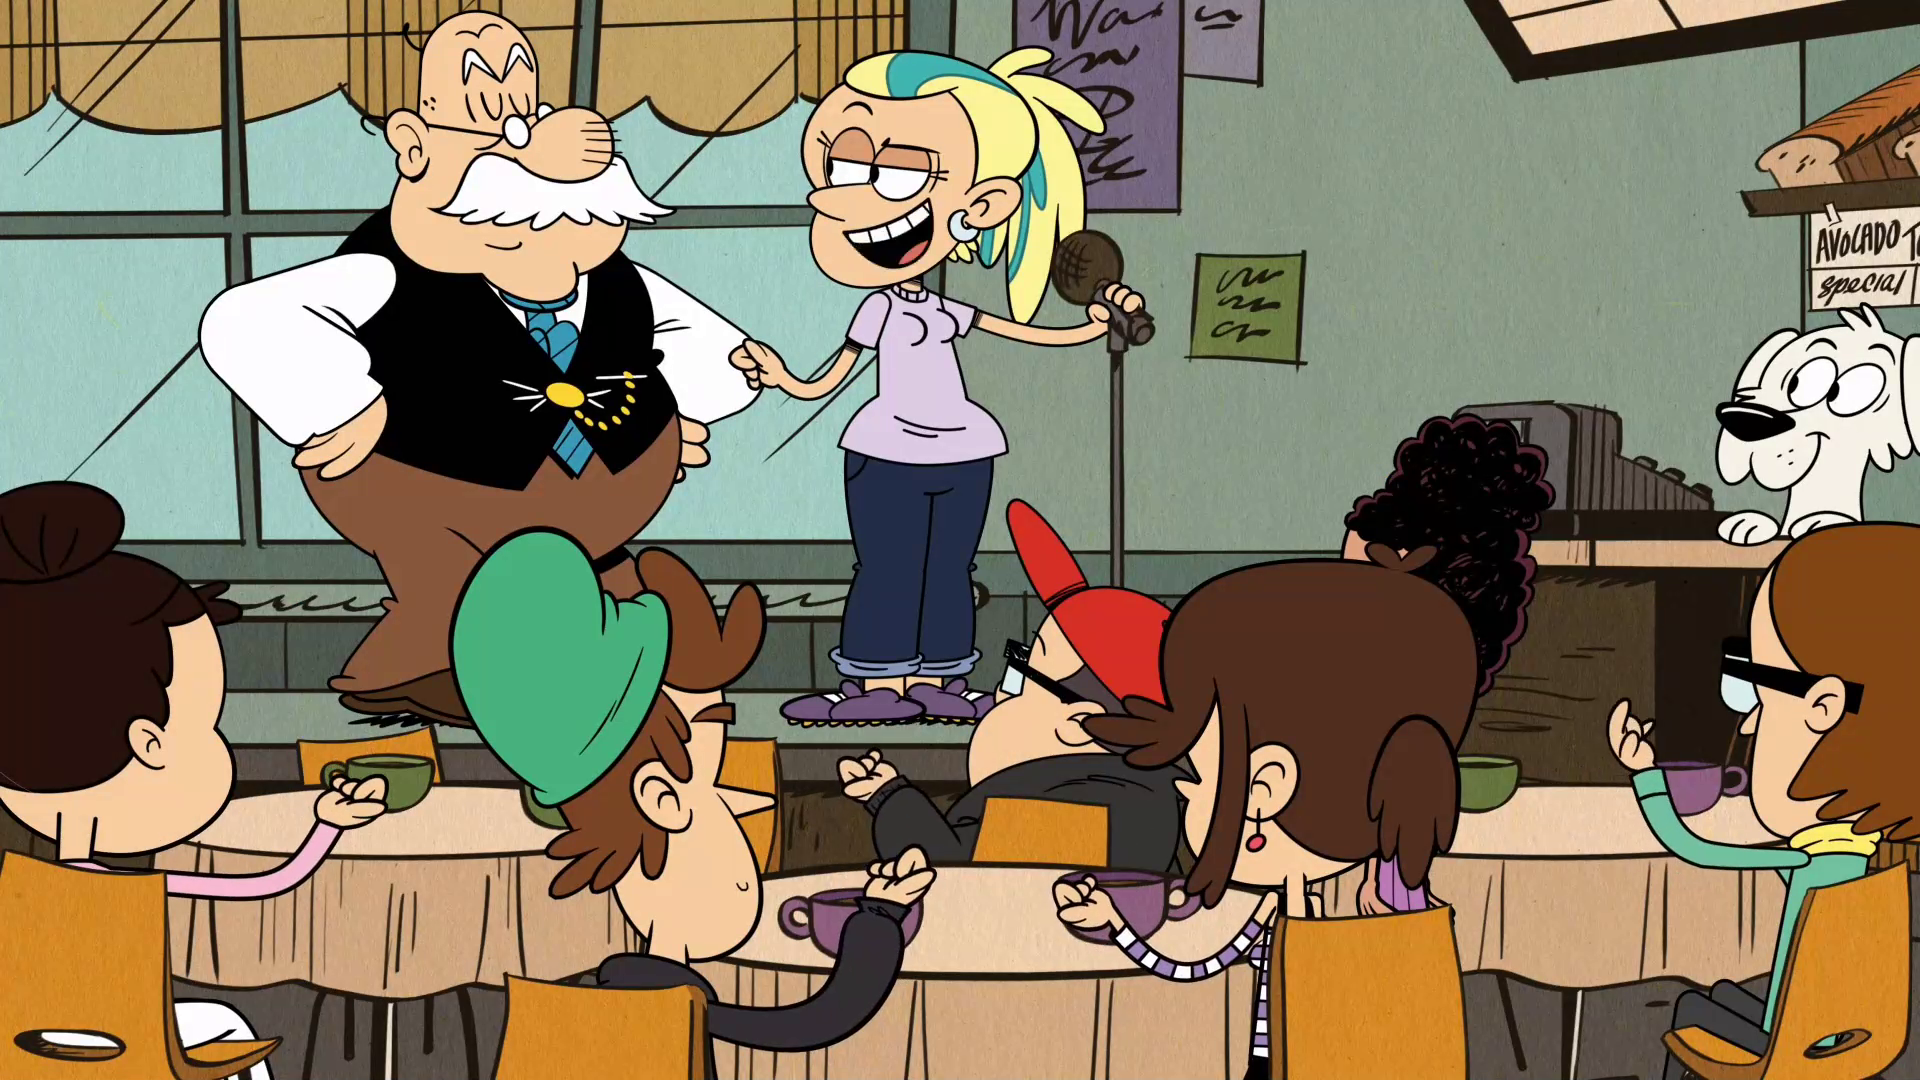 The Loud House, Writing Club Takeover